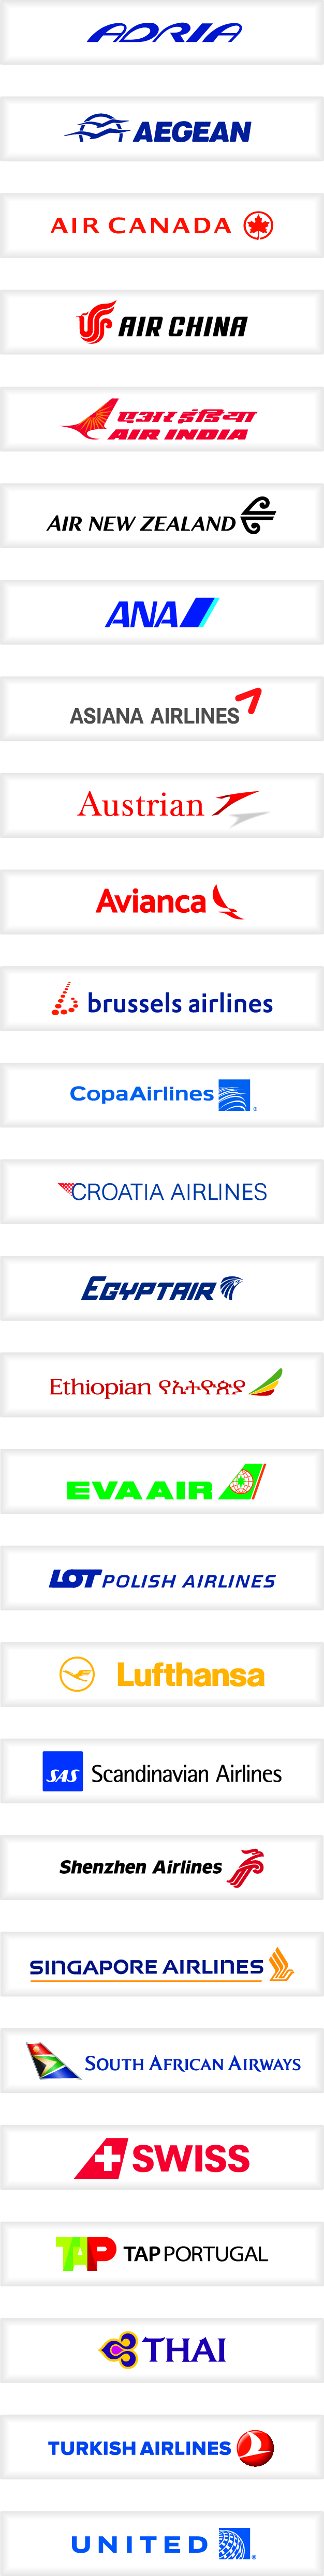 Internet putovanja - Official travel agency for SDEWES2015 for  international flight tickets